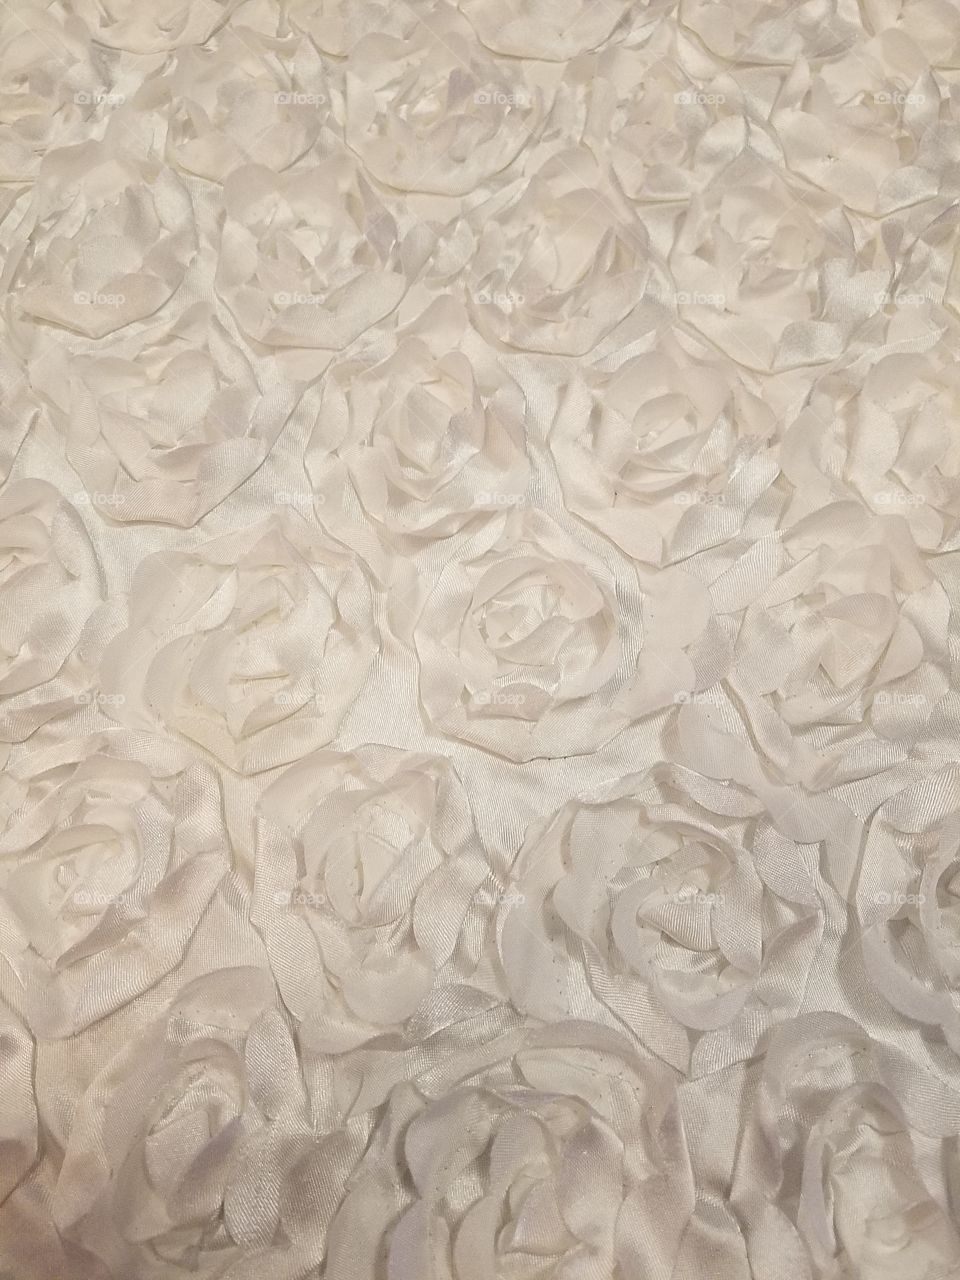 A tablecloth with a rose pattern